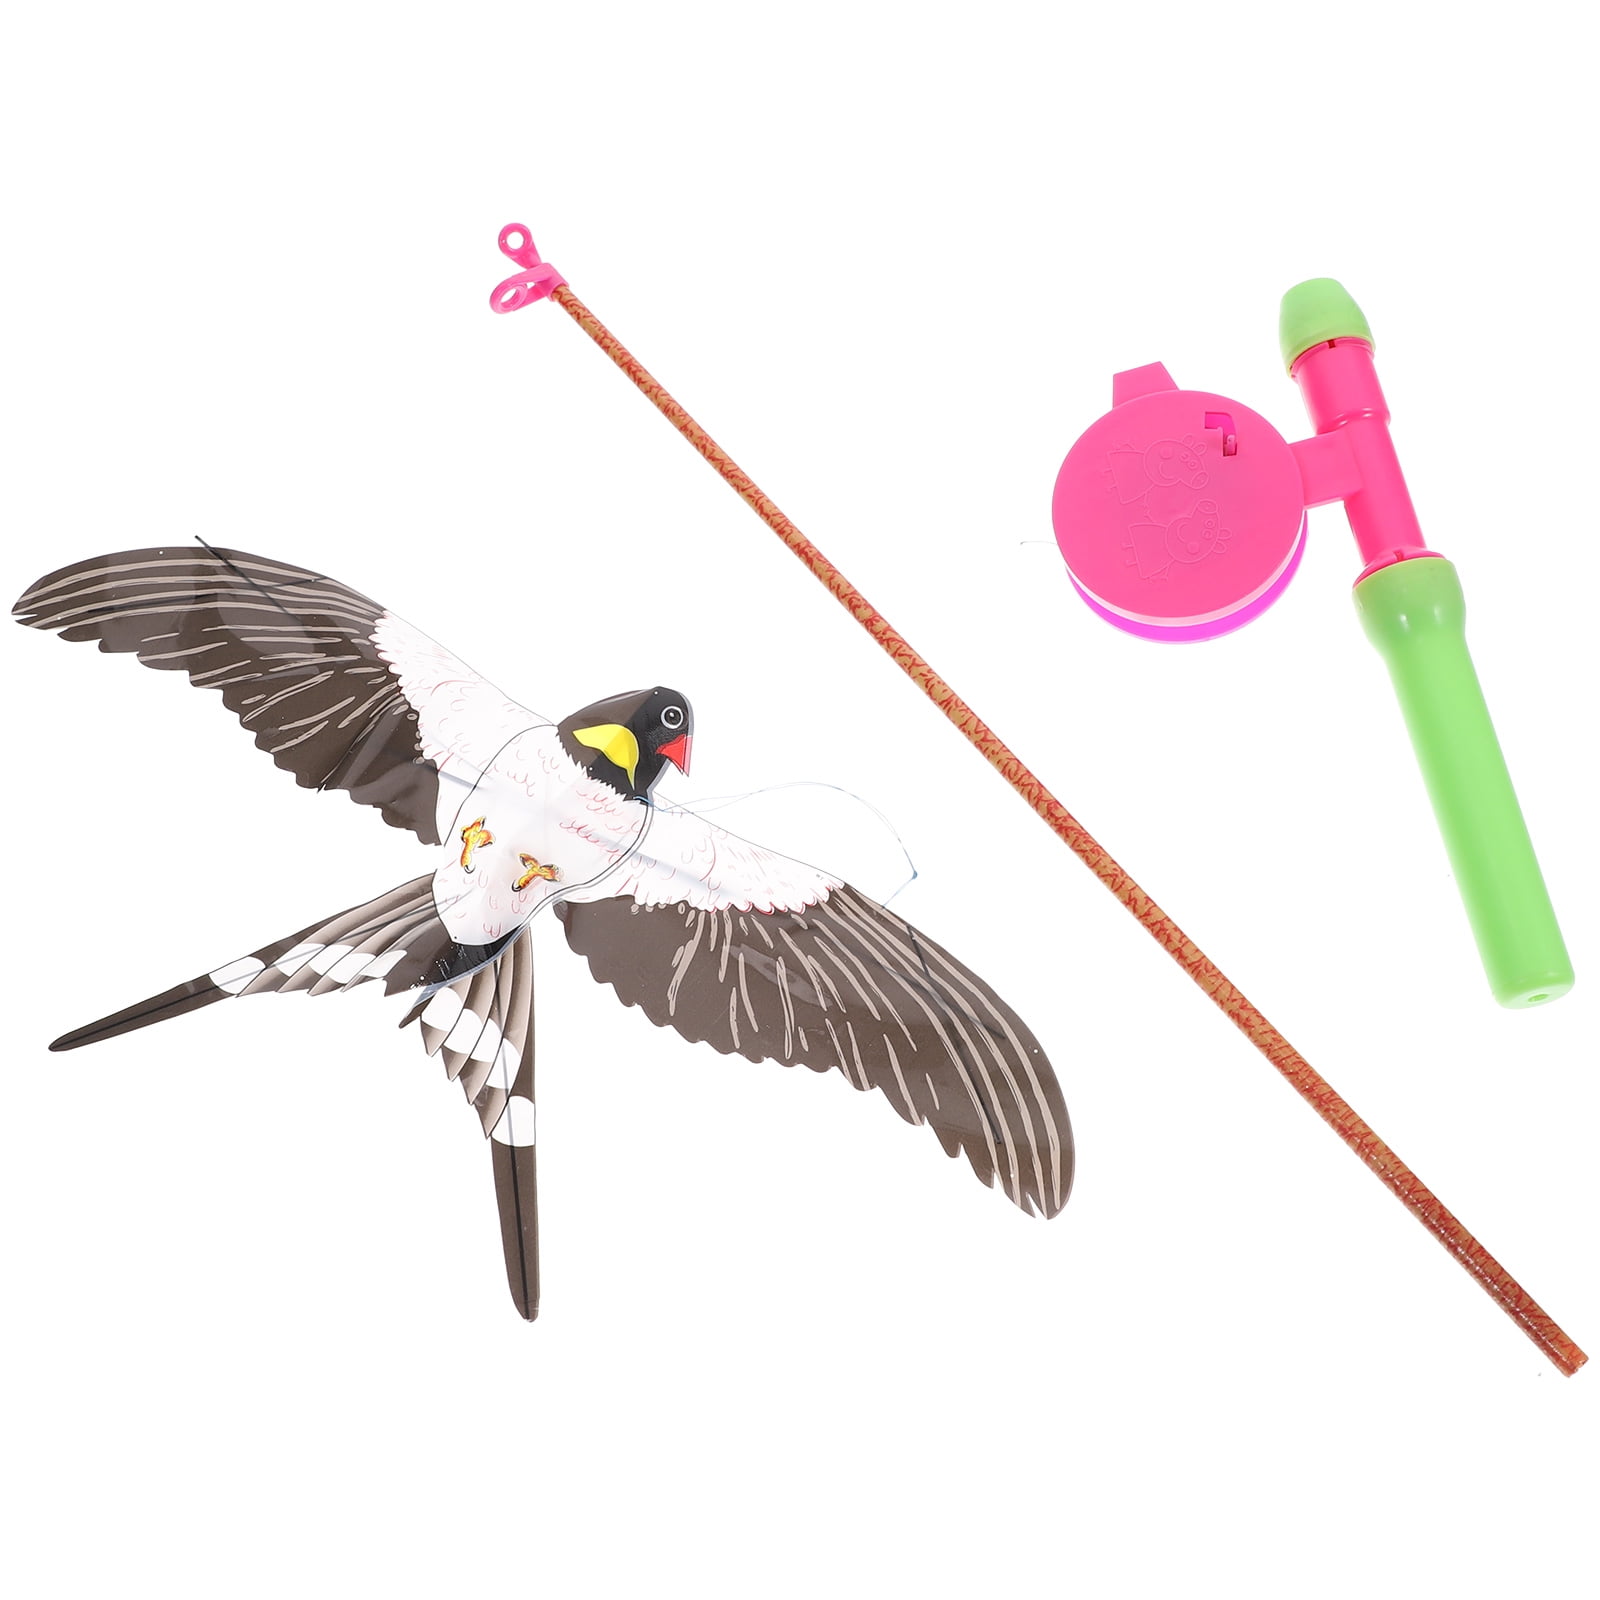 Swallow Bird Kite Easy to Fly Kite Outdoor Funny Kite for Kids with Fishing Pole (Random Color), Size: 30x15cm